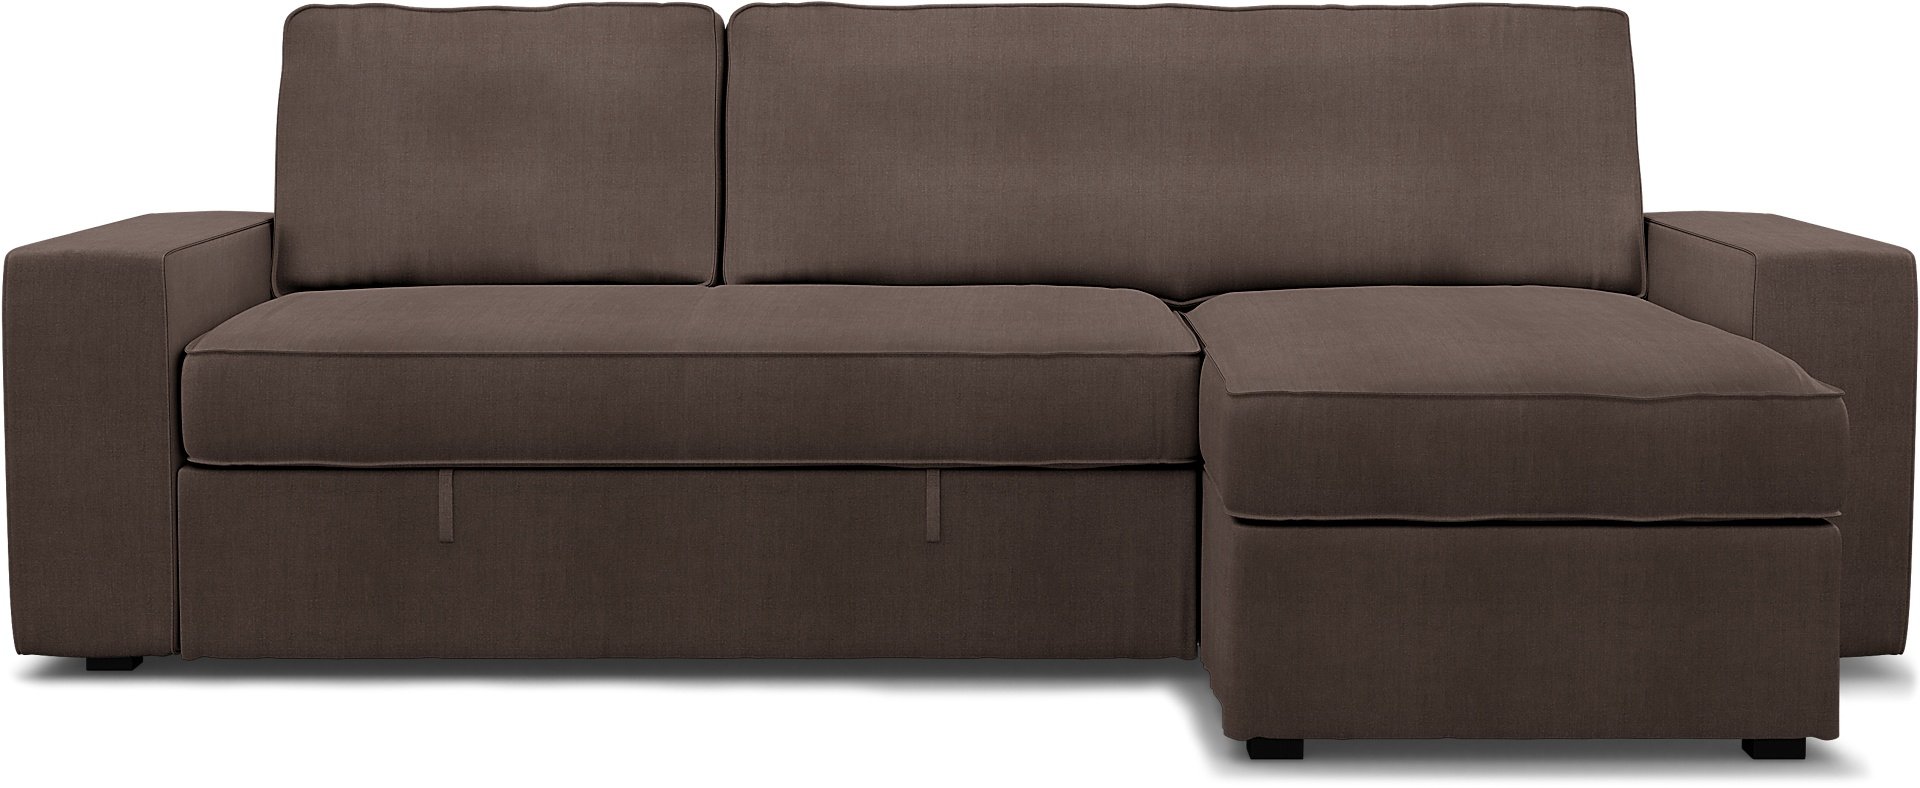 IKEA - Vilasund sofa bed with chaise cover, Cocoa, Linen - Bemz